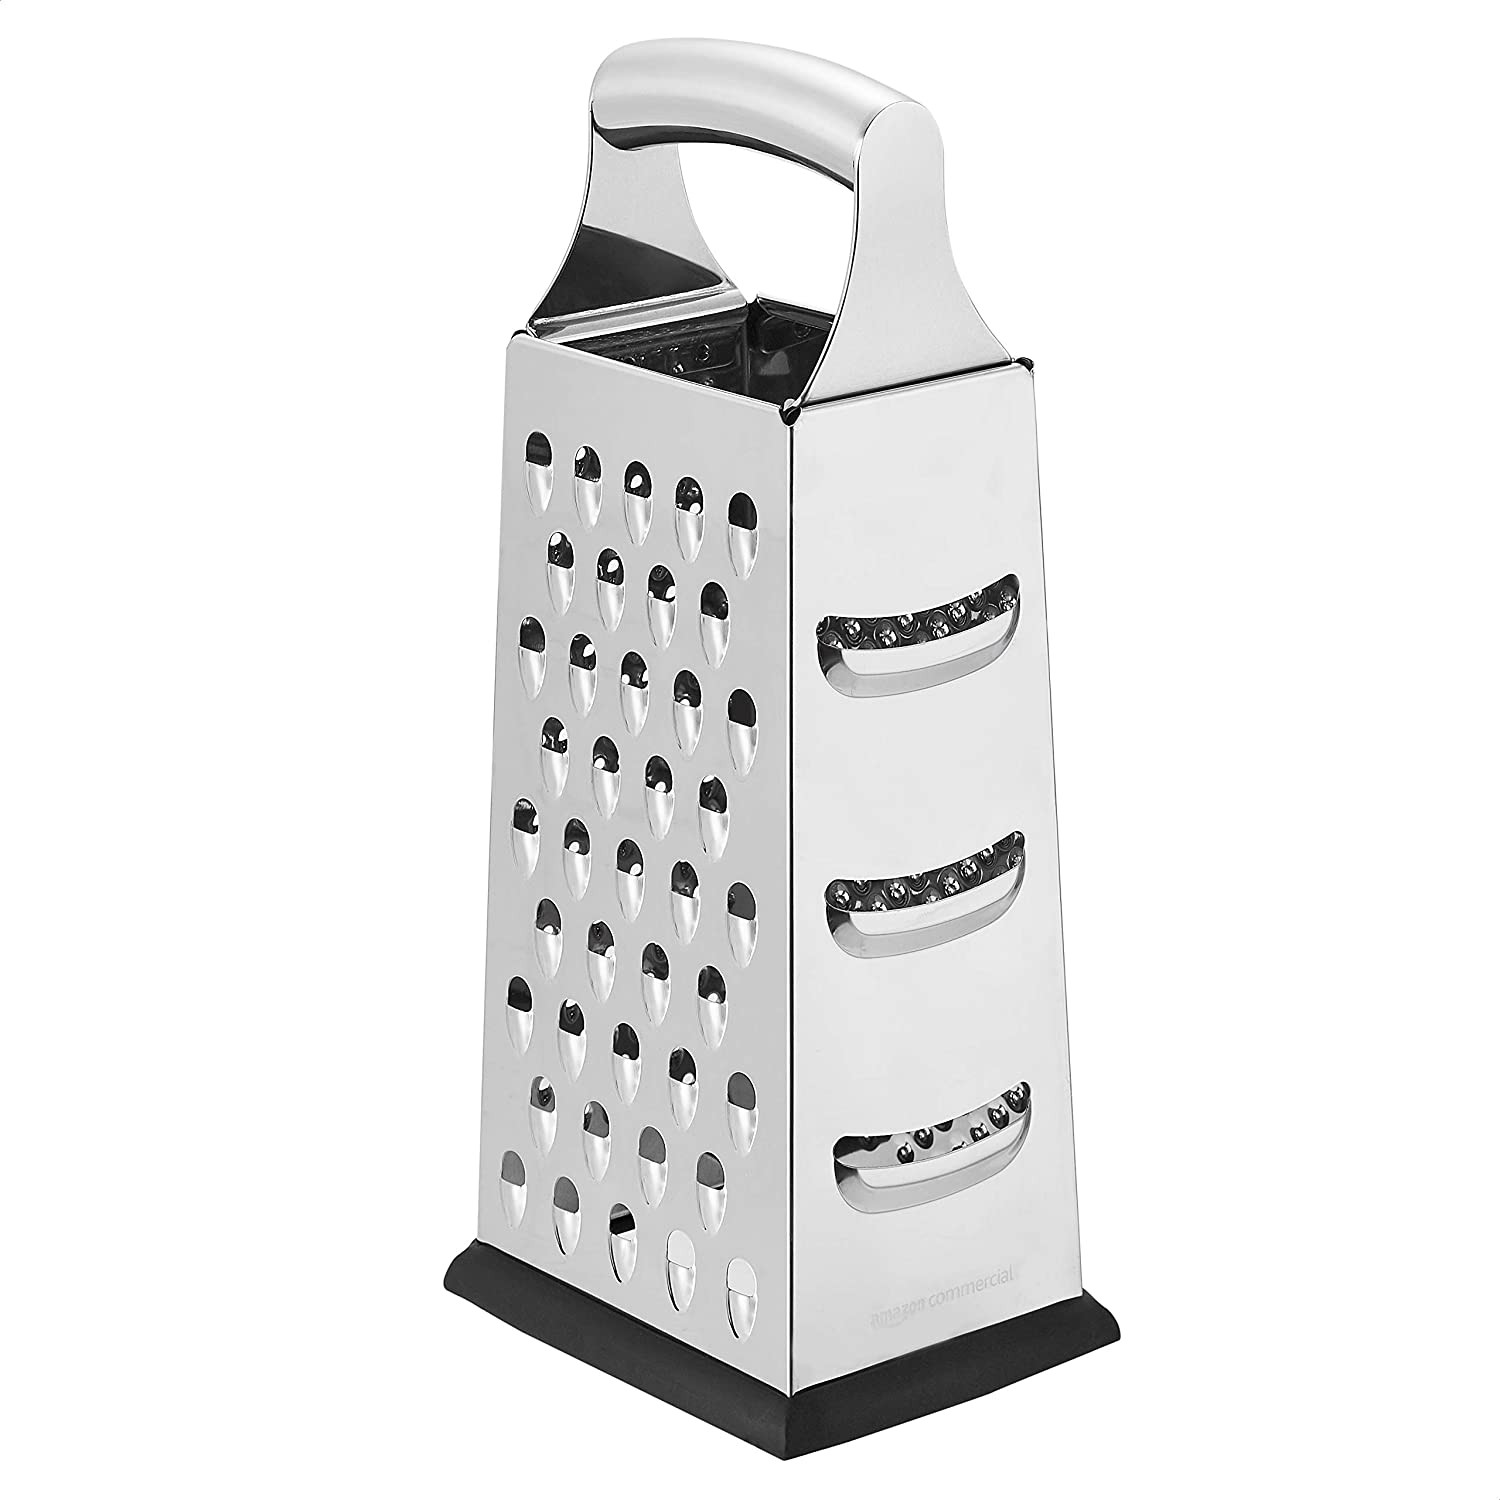 AmazonCommercial Stainless Steel Rotary Cheese Grater Import To Shop ×Product customization General Description Gallery Reviews